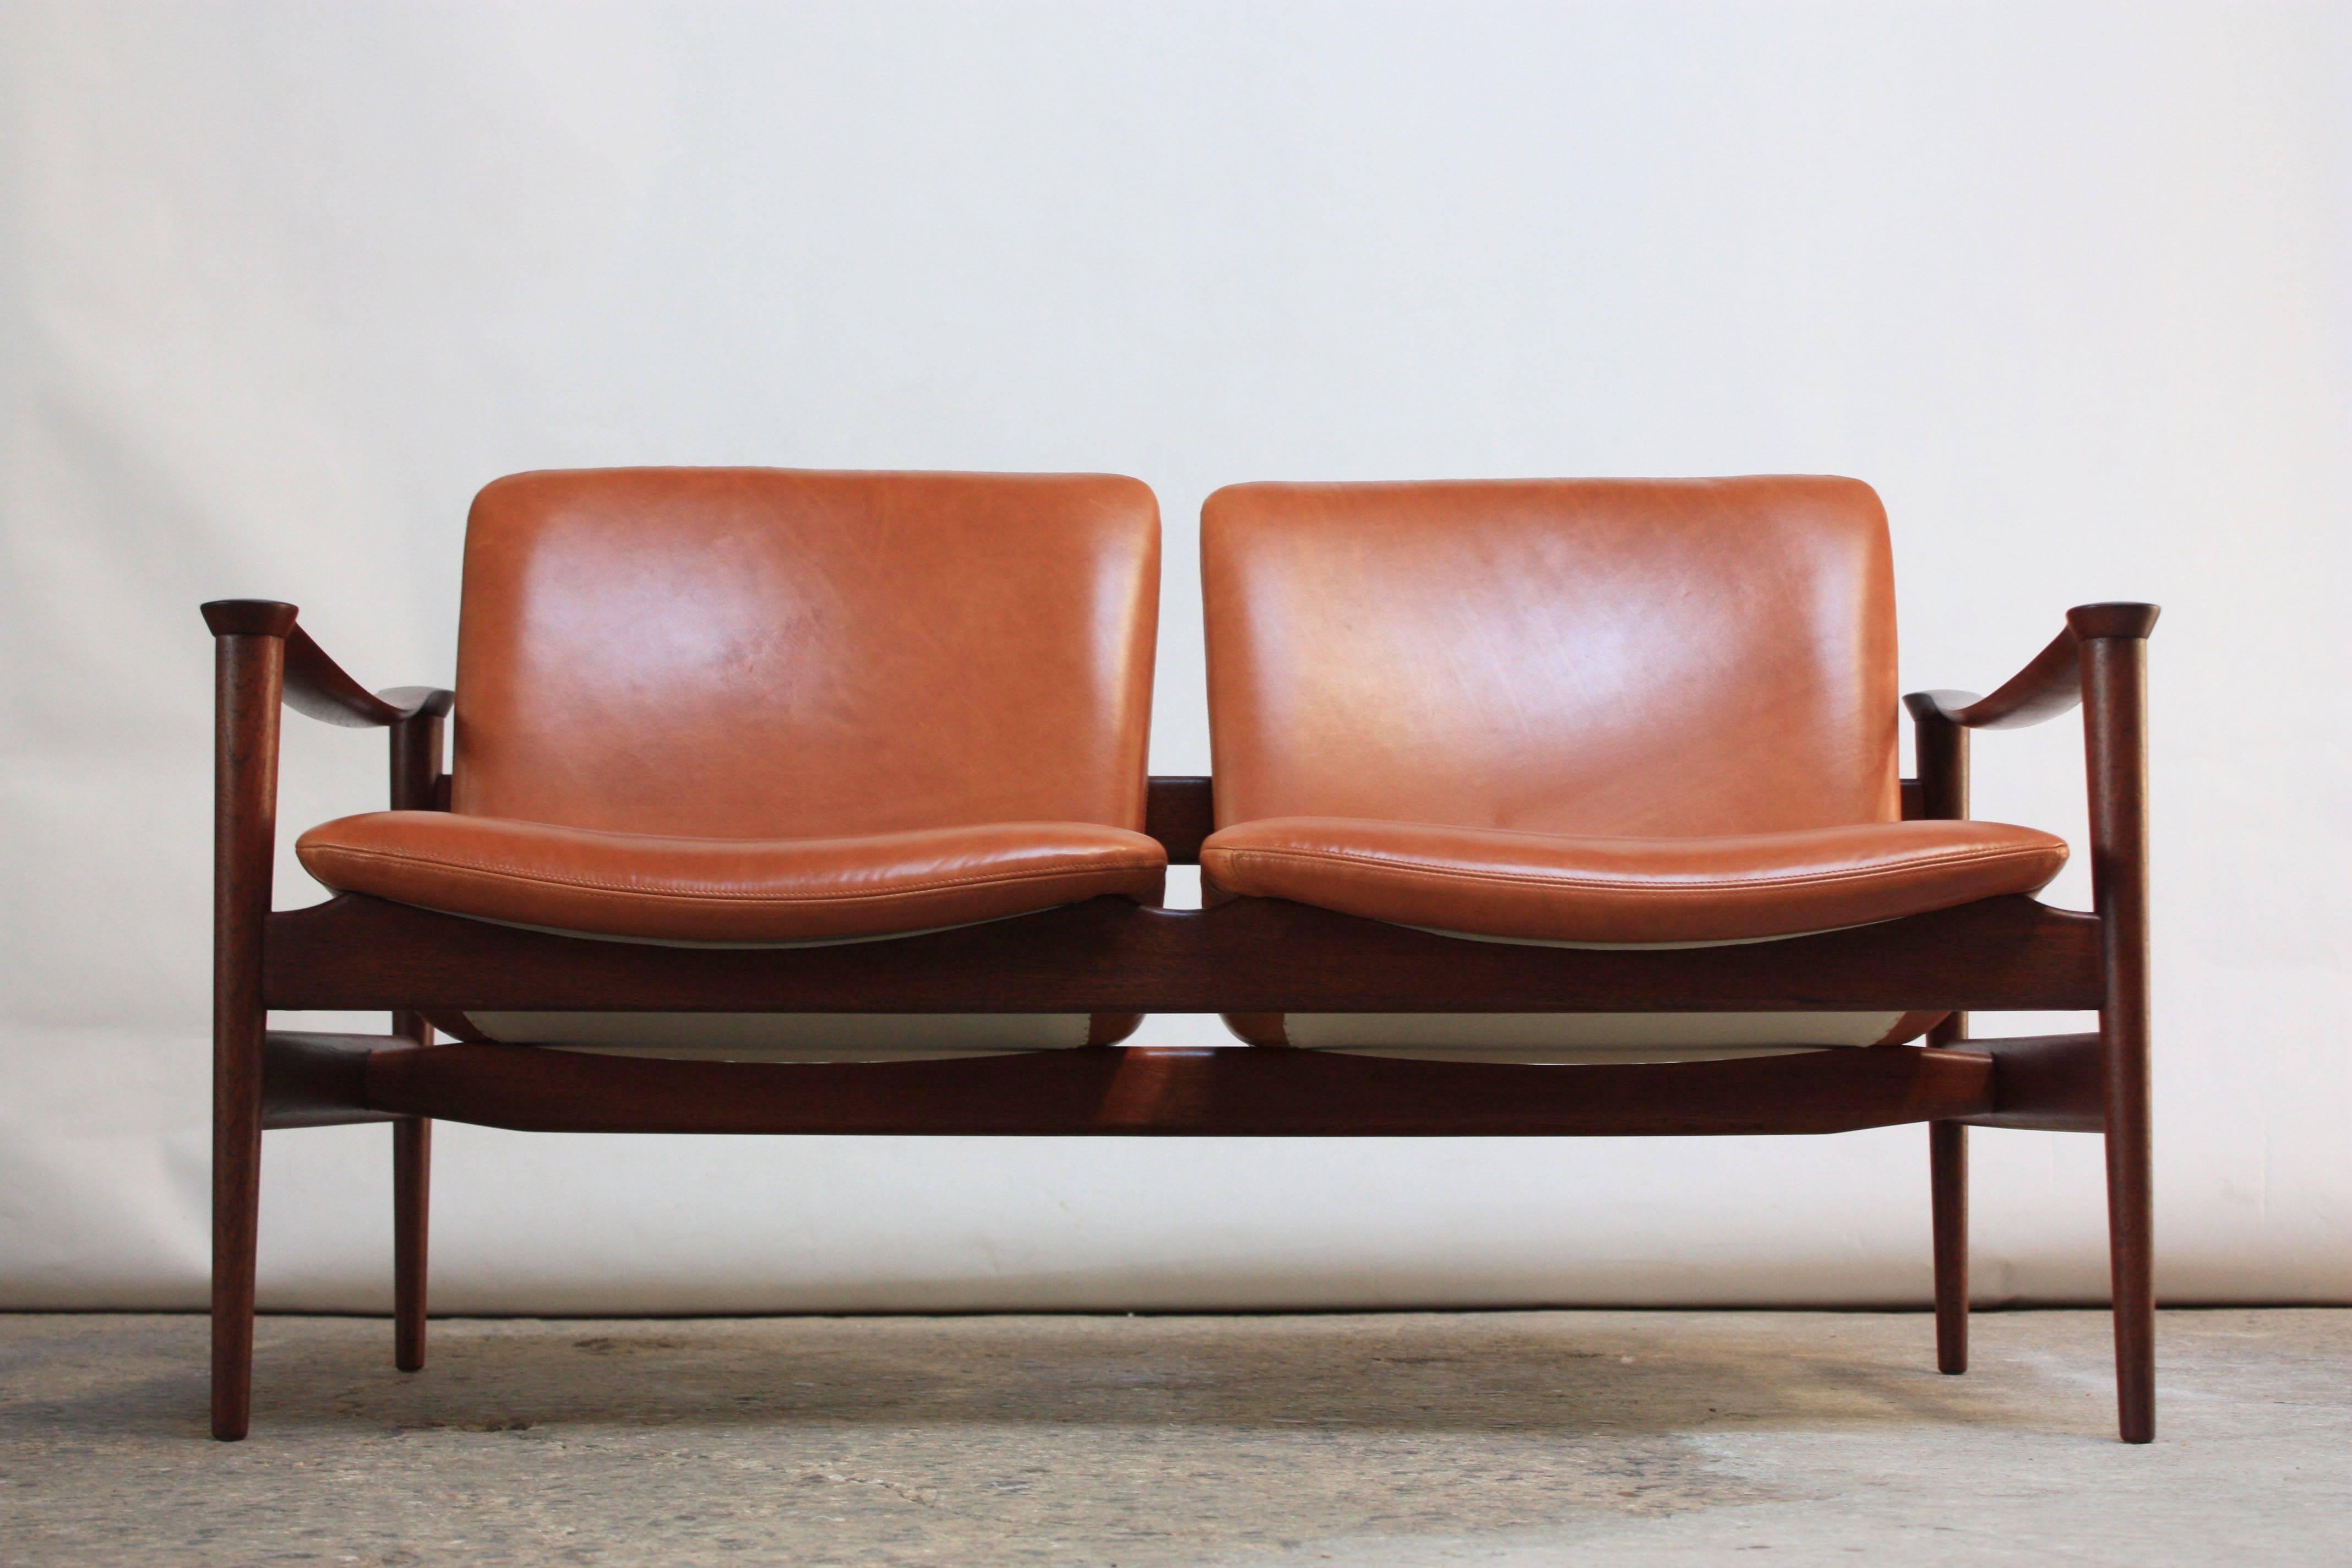 This two-seat sofa was designed by Fredrik Kayser for Vatne Lenestolfabrikk (ca. 1960s, Norway). 
Magnificent frame in sculpted teak with armrests resembling two conjoined cul-de-sacs. 
Solid patinated brass posts connect the seats to the frame in